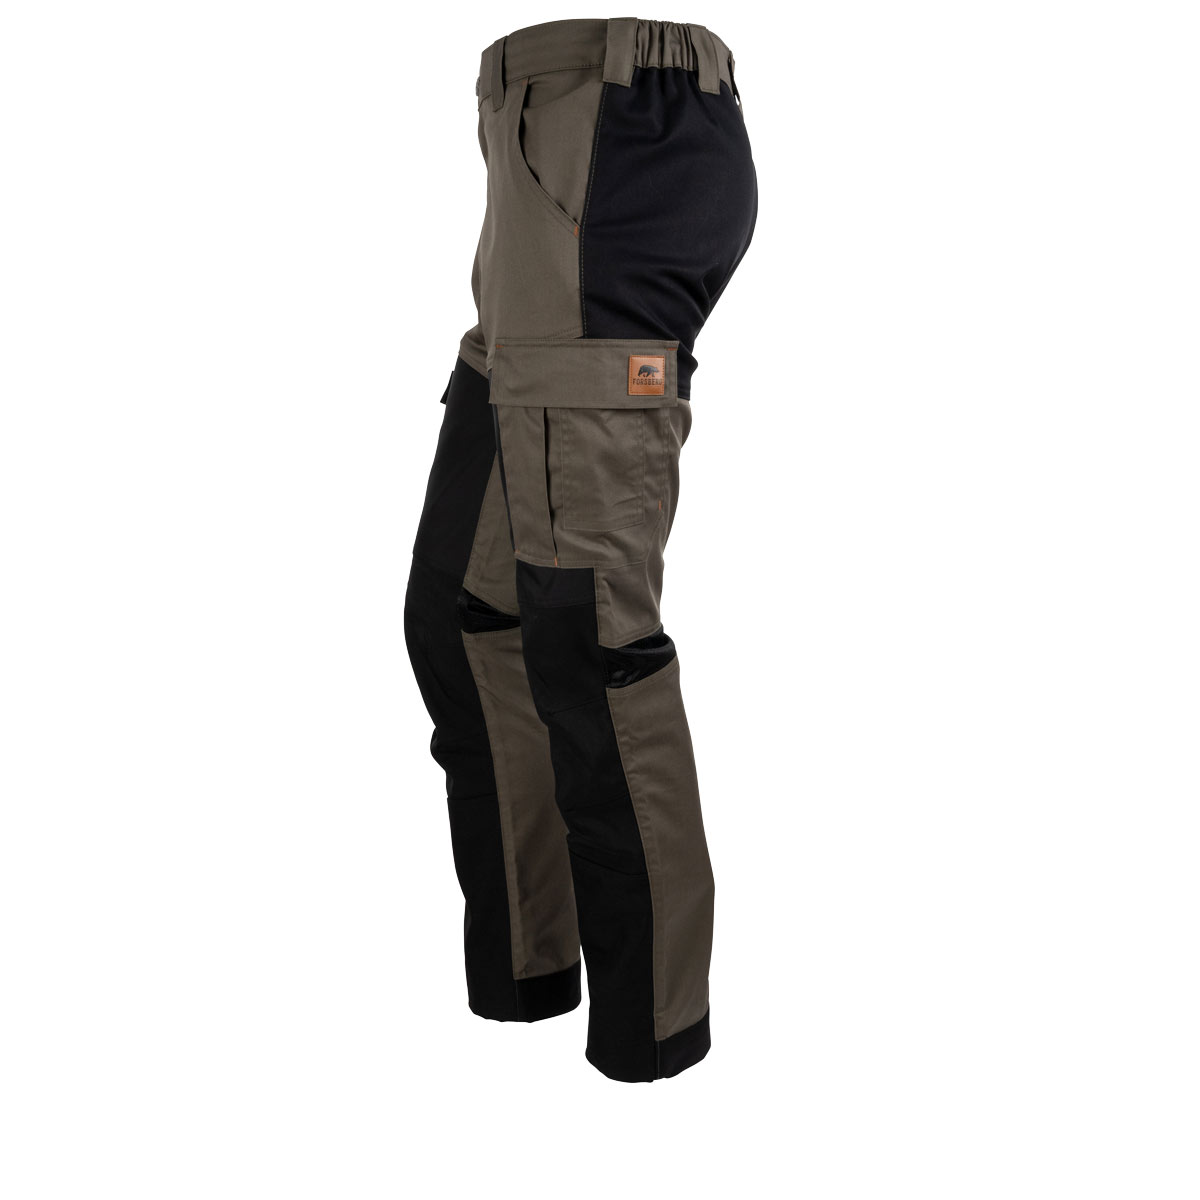 FORSBERG Vildmark extremely robust and elastic outdoor pants